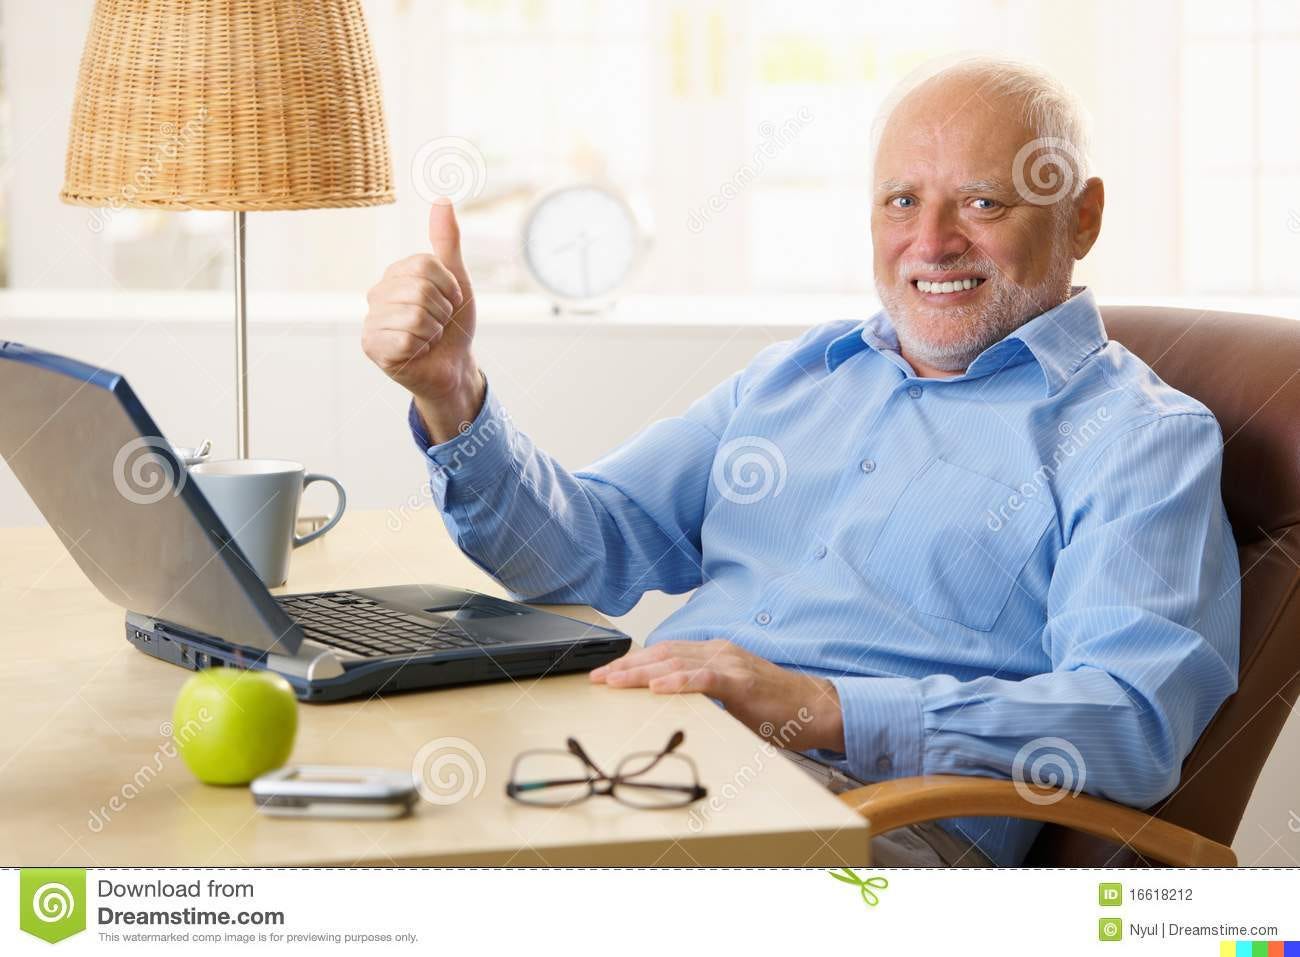 “Hide the Pain Harold” meme with the eponymous Harold giving a pained-looking thumbs up from behind a raft of obvious Dreamstime watermarks, with the Dreamstime download footer stuck to it as well, and an extremely subtle DALL-E watermark in the bottom right corner. Is it a real AI image? I’ll never tell.  